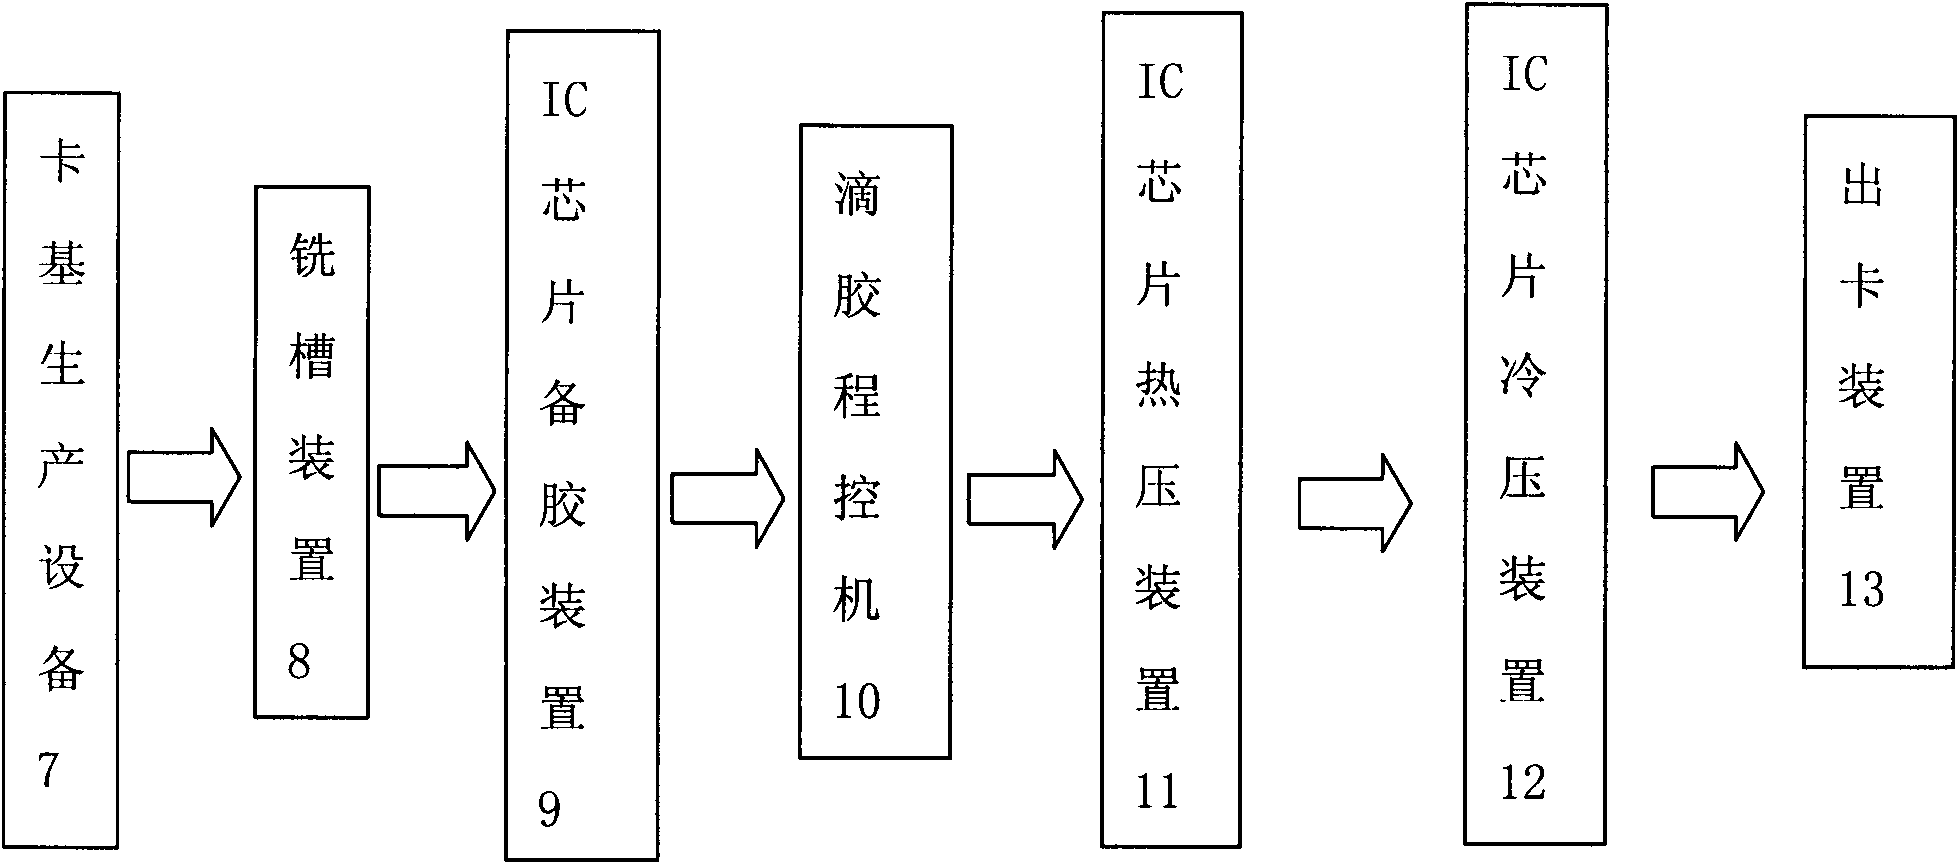 Anti-counterfeiting integrated circuit (IC) card, and equipment and method for producing anti-counterfeiting IC card